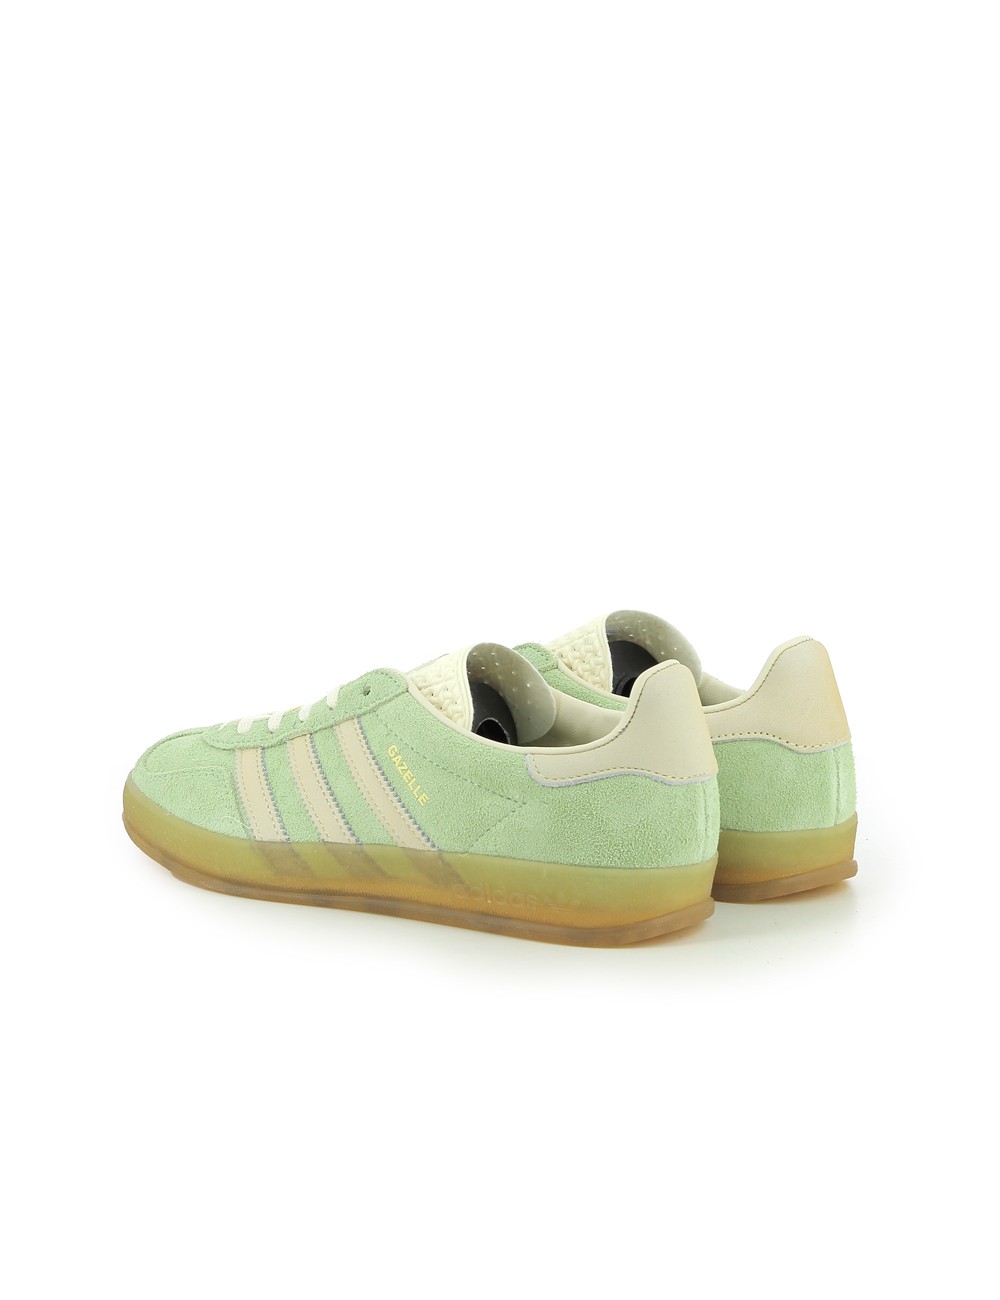 Adidas Gazelle Indoor W Green Spark S24 Almost Yellow F22 Cream White IE2948